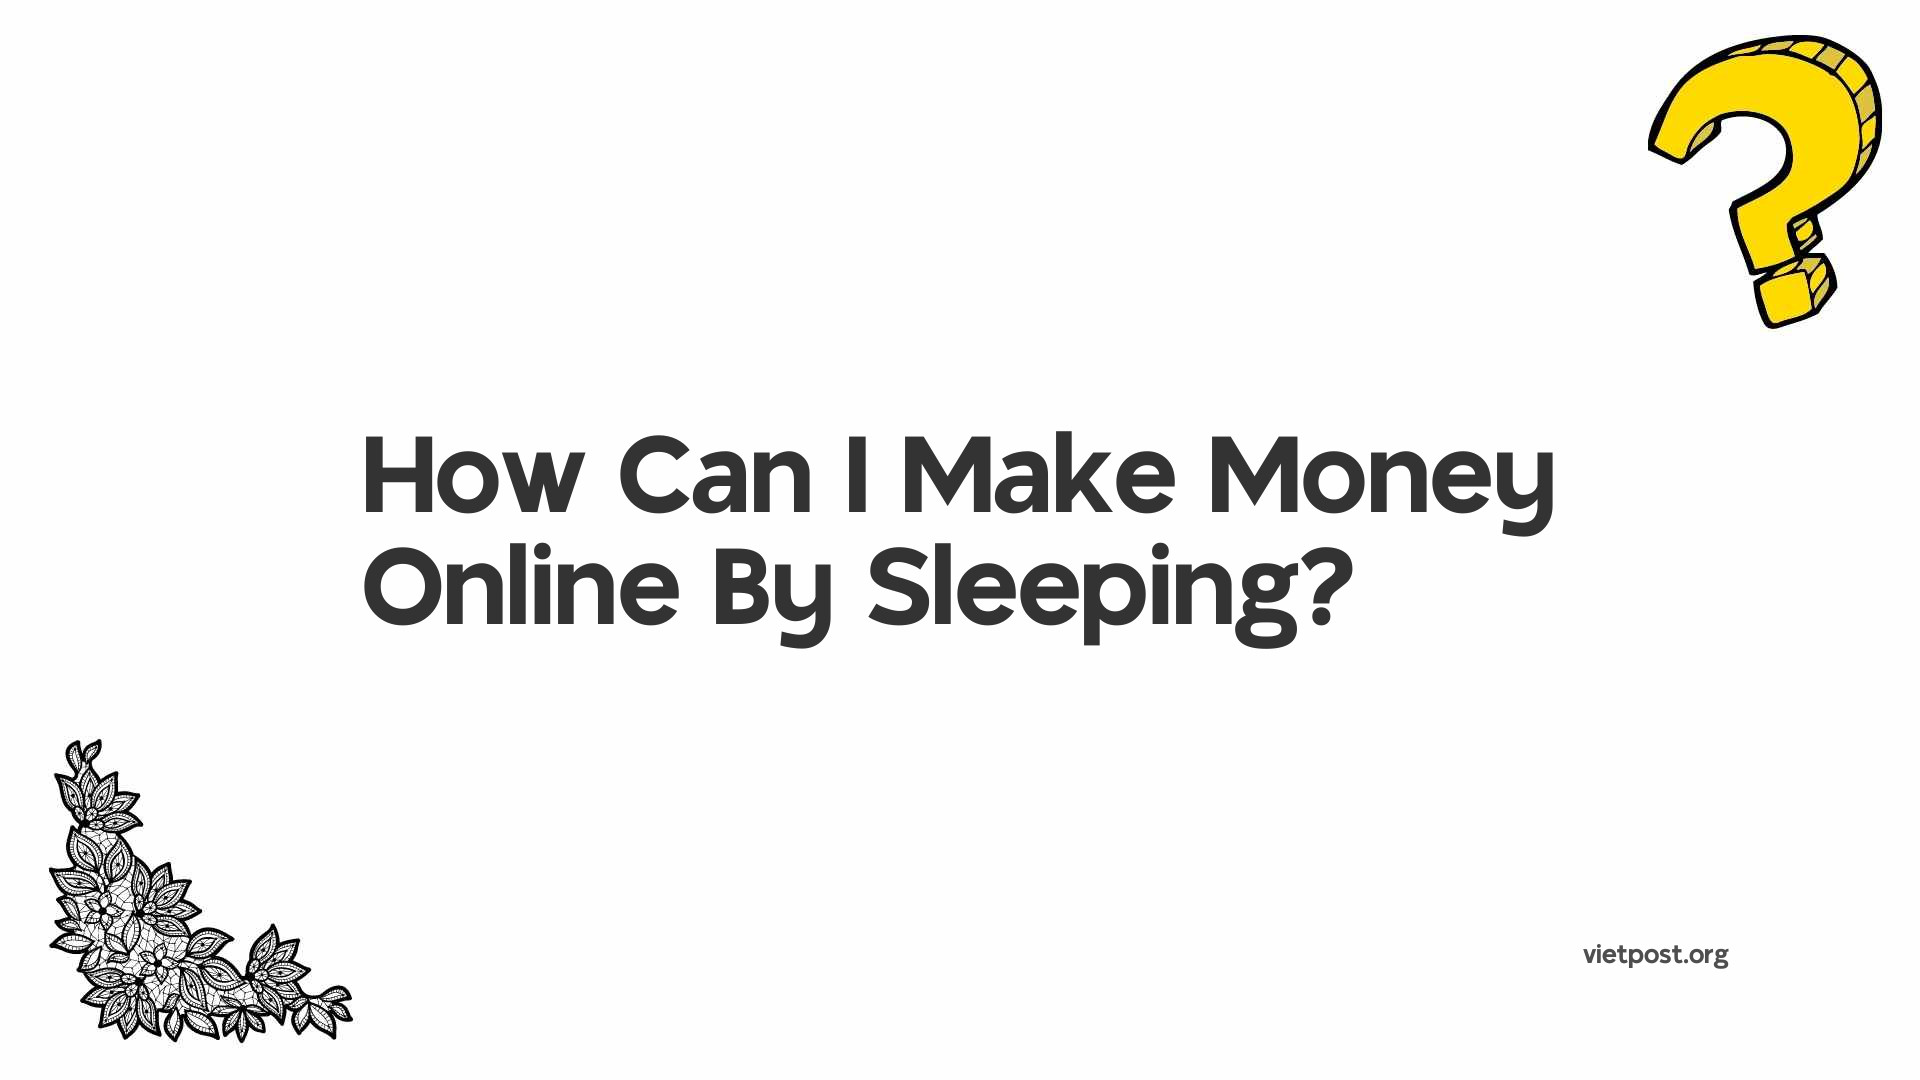 How Can I Make Money Online By Sleeping?